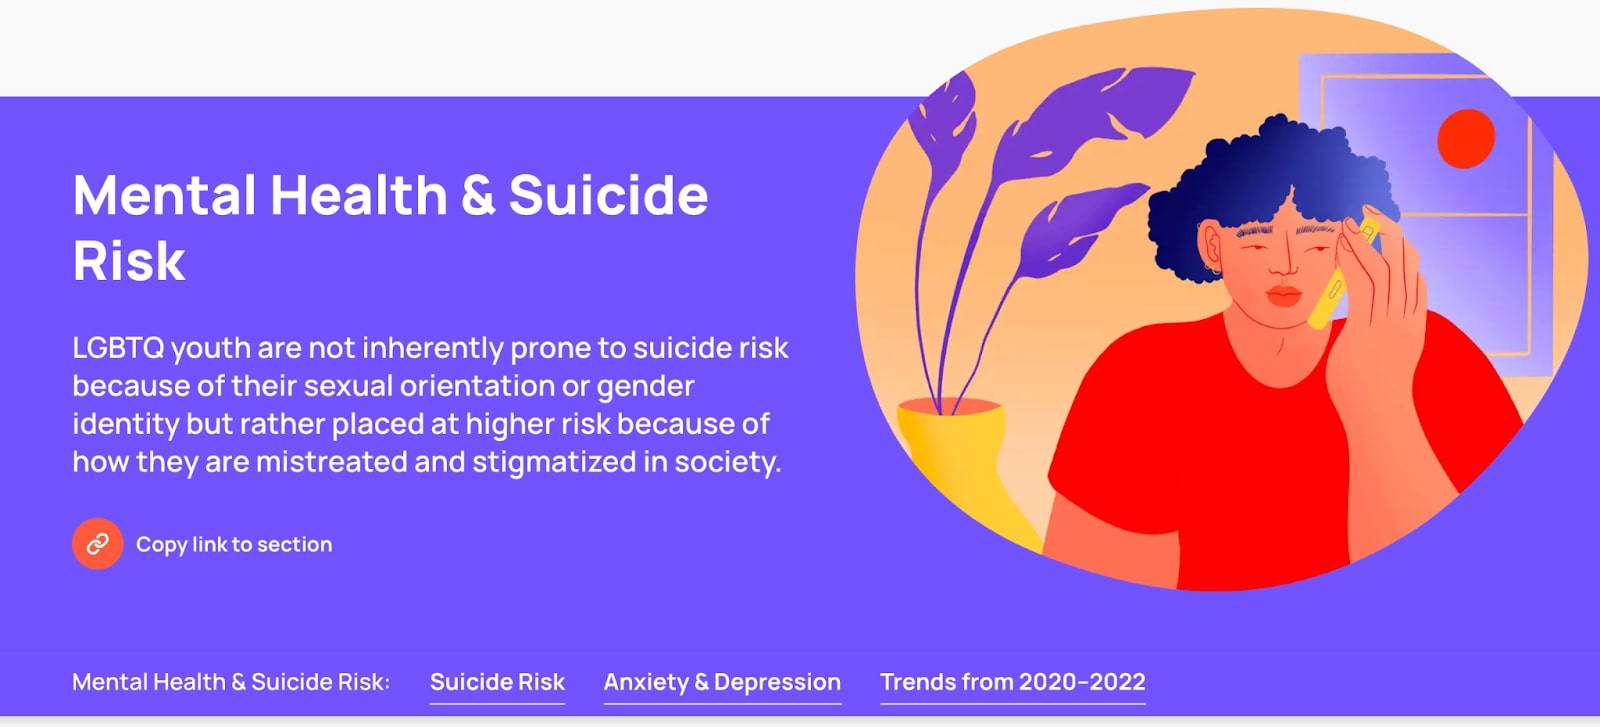 Mental Health & Suicide Risk as reported by The Trevor Project's 2021 National LGBTQ Youth Mental Health Survey